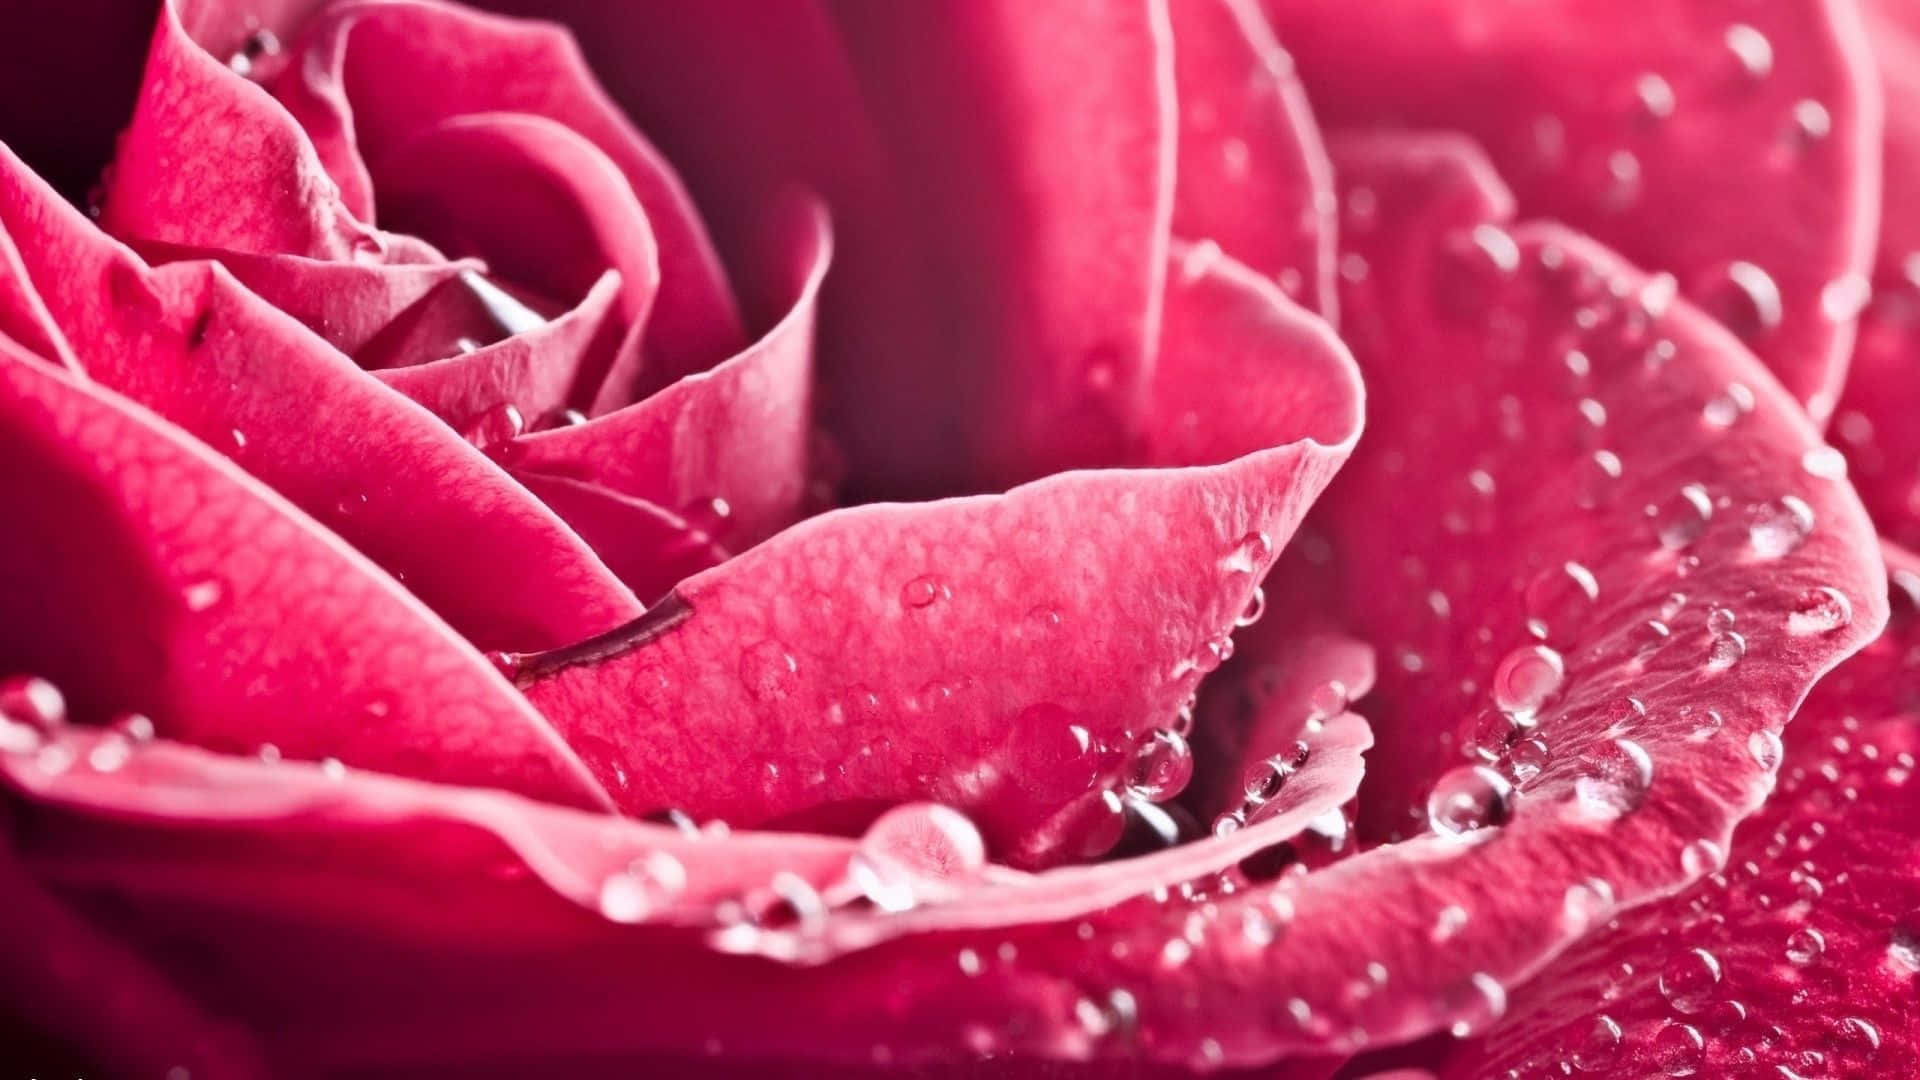 A Close Up Of A Pink Rose With Water Droplets Wallpaper